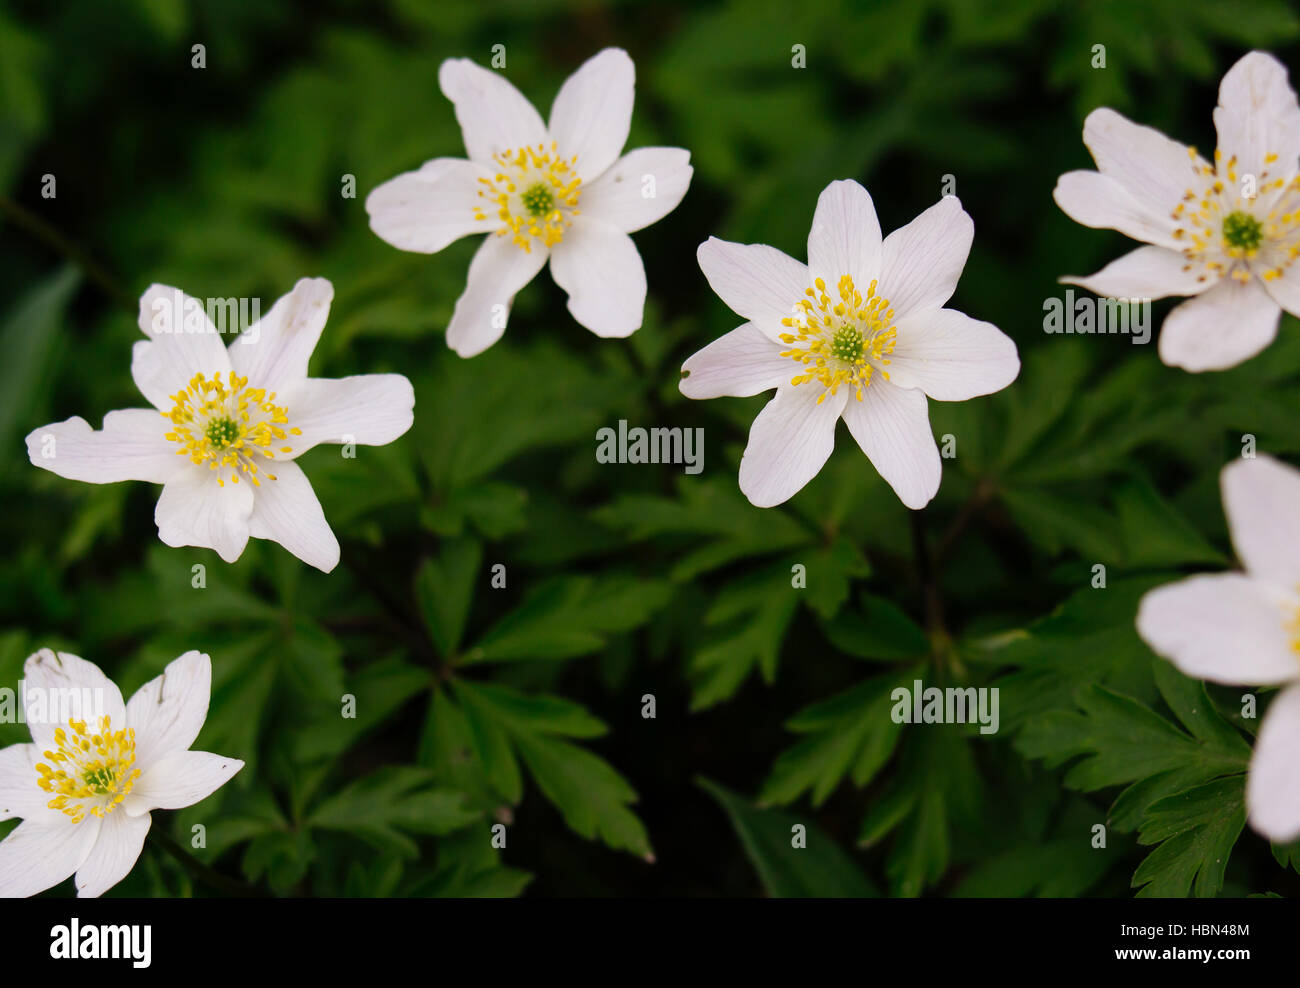 A closeup of white forest anemone flowers blooming. Stock Photo